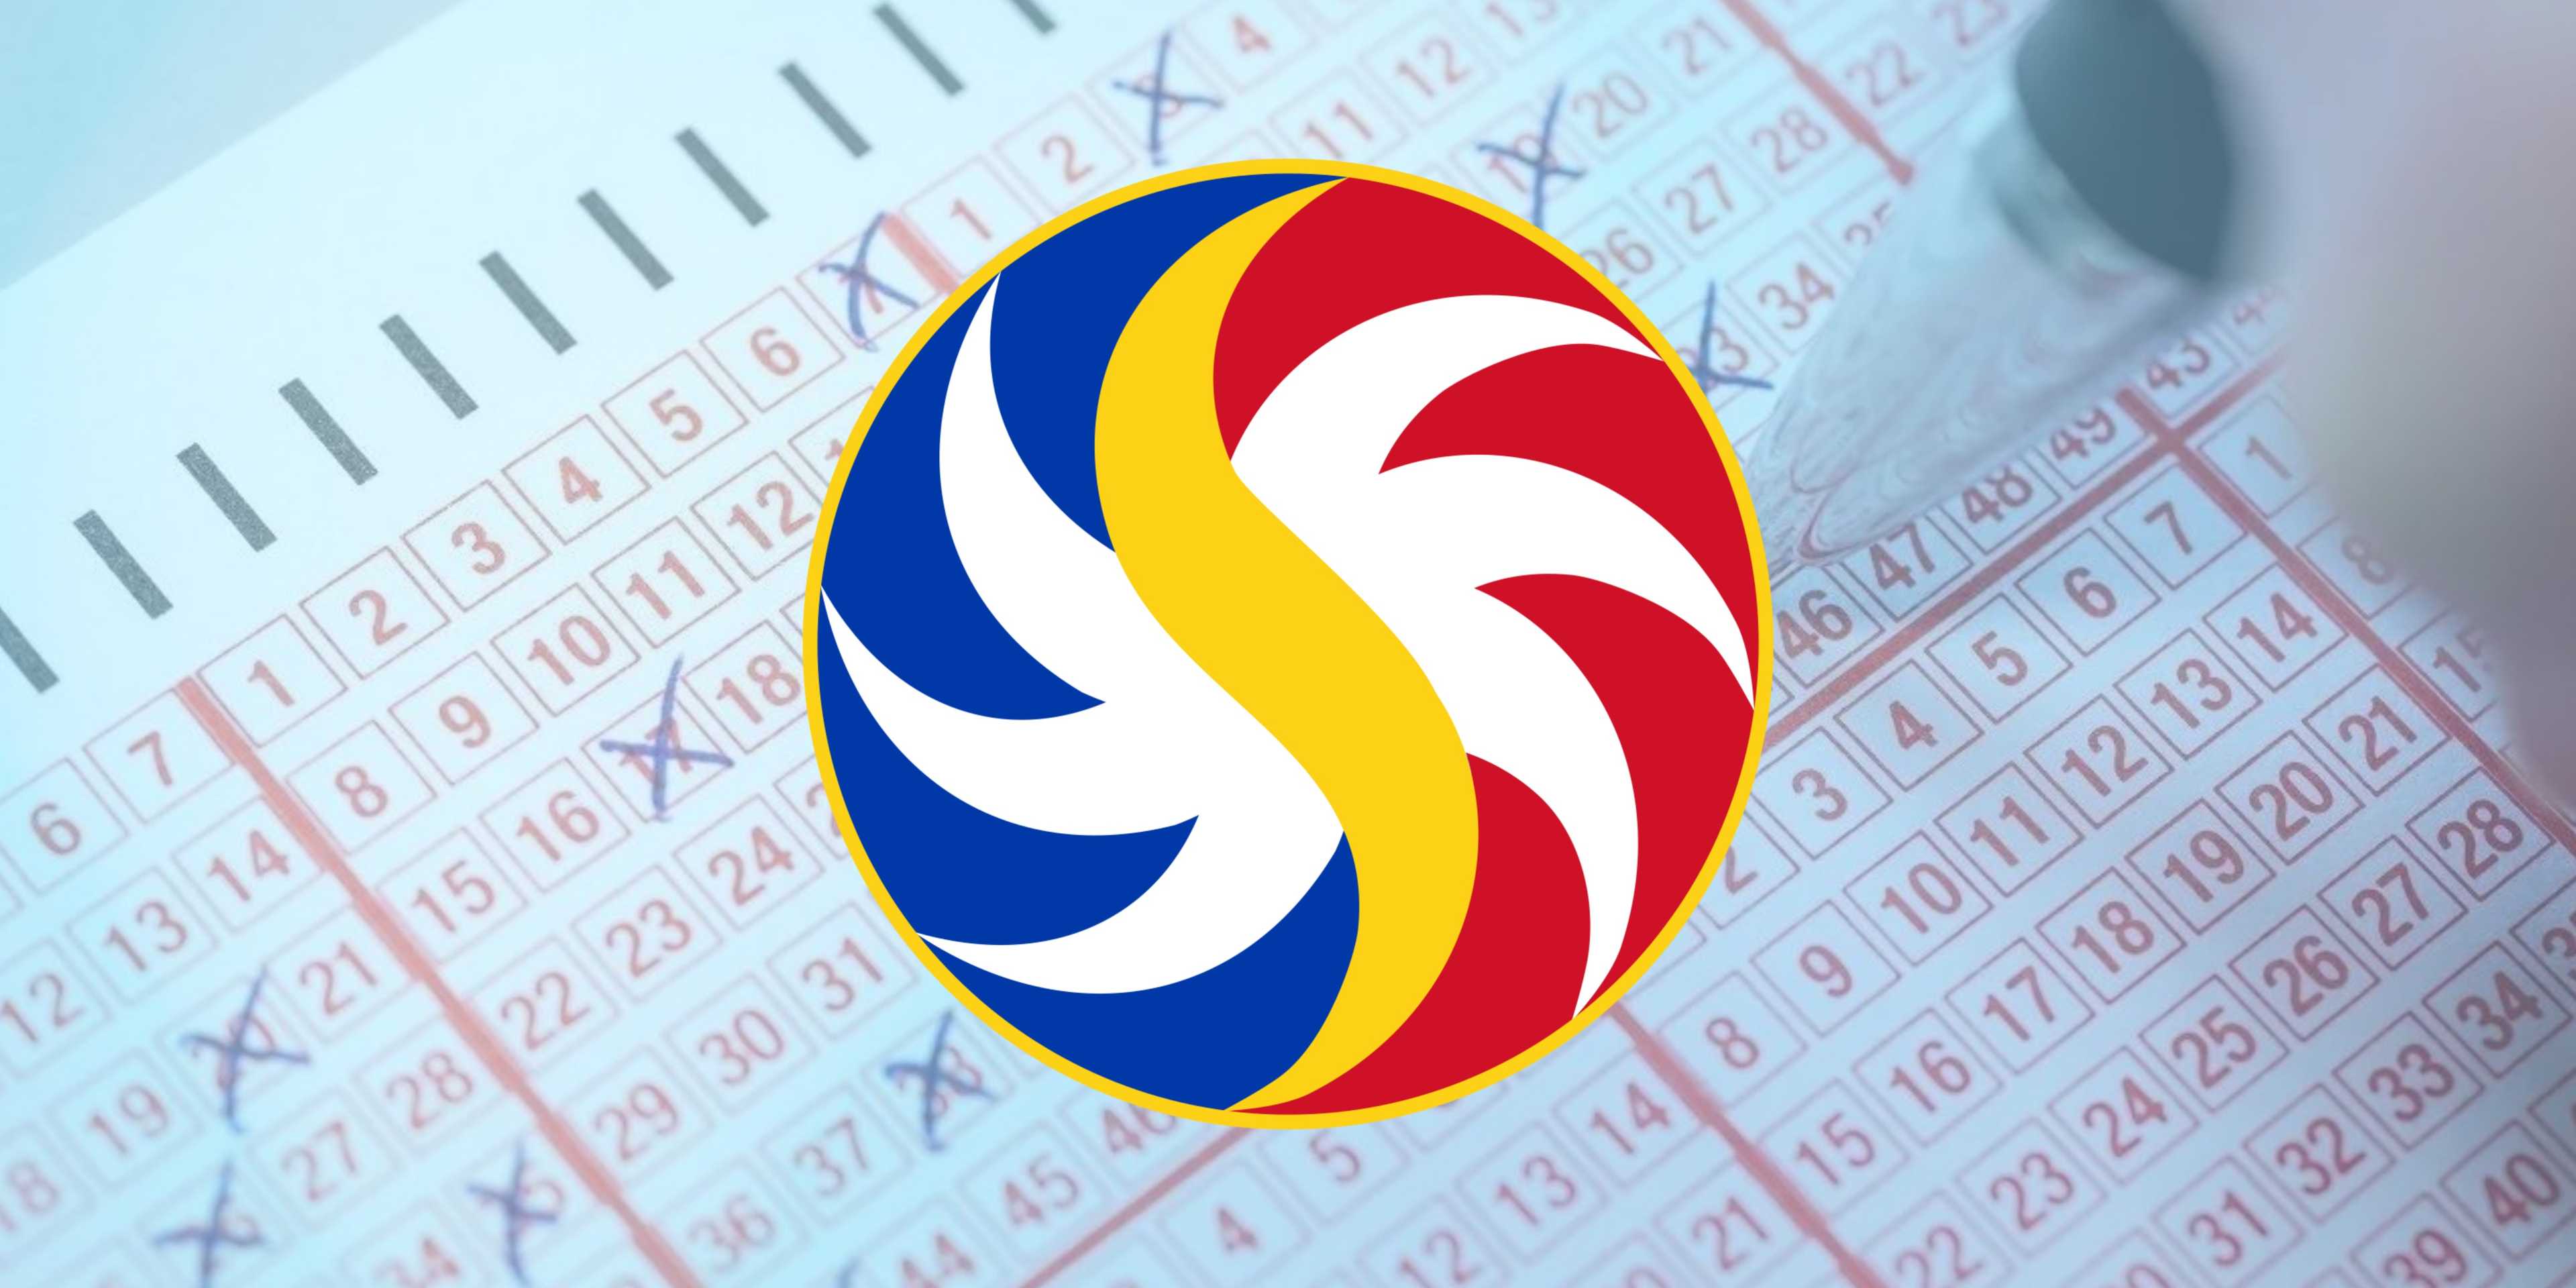 PCSO Lotto Draw Results on Monday, February 12